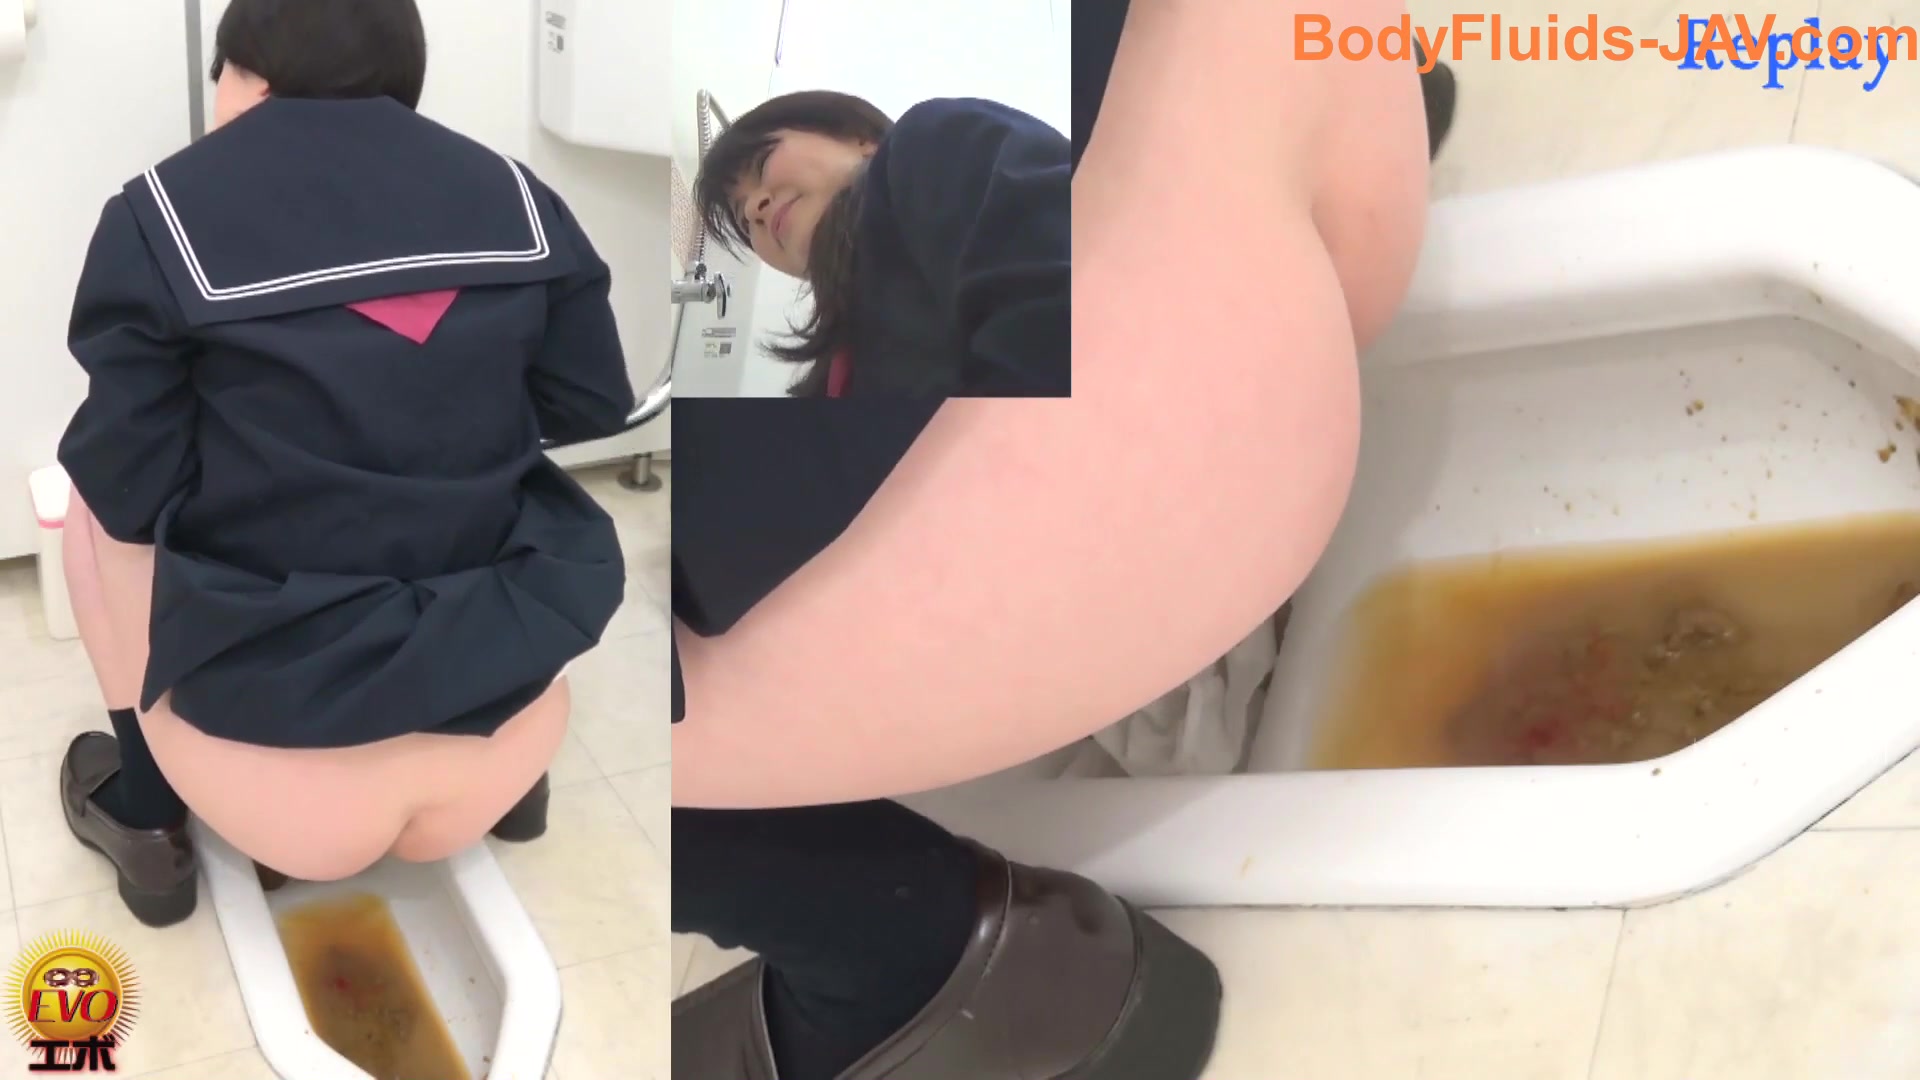 1920px x 1080px - Bad School Lunch 19 - ScatFap.com - scat porn search - FREE videos of  extreme kaviar and copro sex, dirty shit eating and smearing